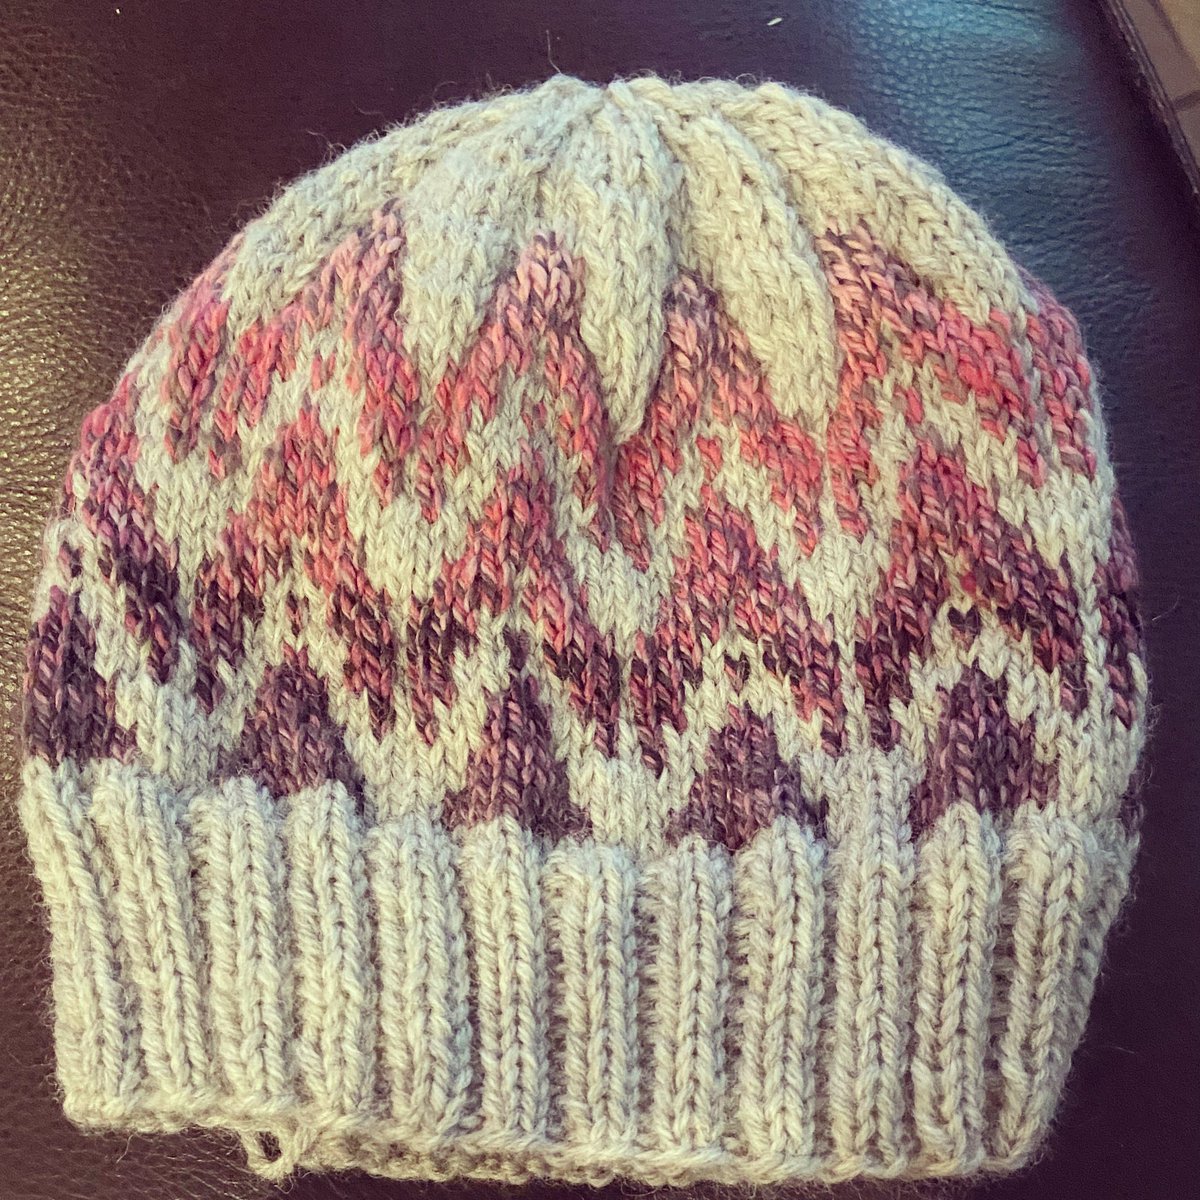 Week off to recover from the last year of teaching...hell? Ridiculousness? All those words. And I knit a hat. In a day. For the last year I’ve barely even had the patience to knit! #mentalhealthdays #knitting